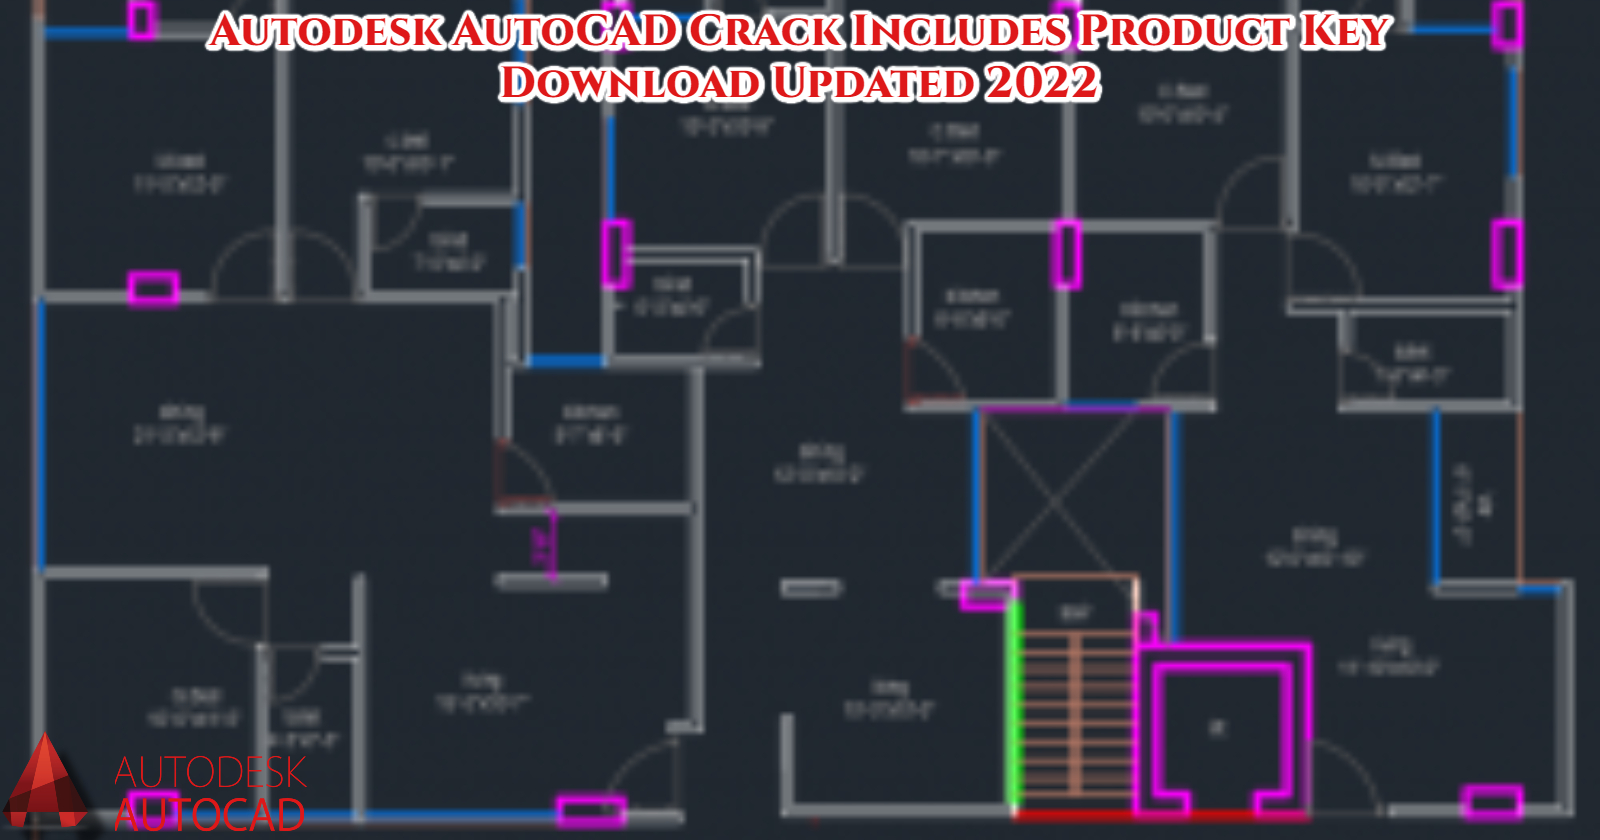 You are currently viewing Autodesk AutoCAD Crack Includes Product Key Download Updated 2022